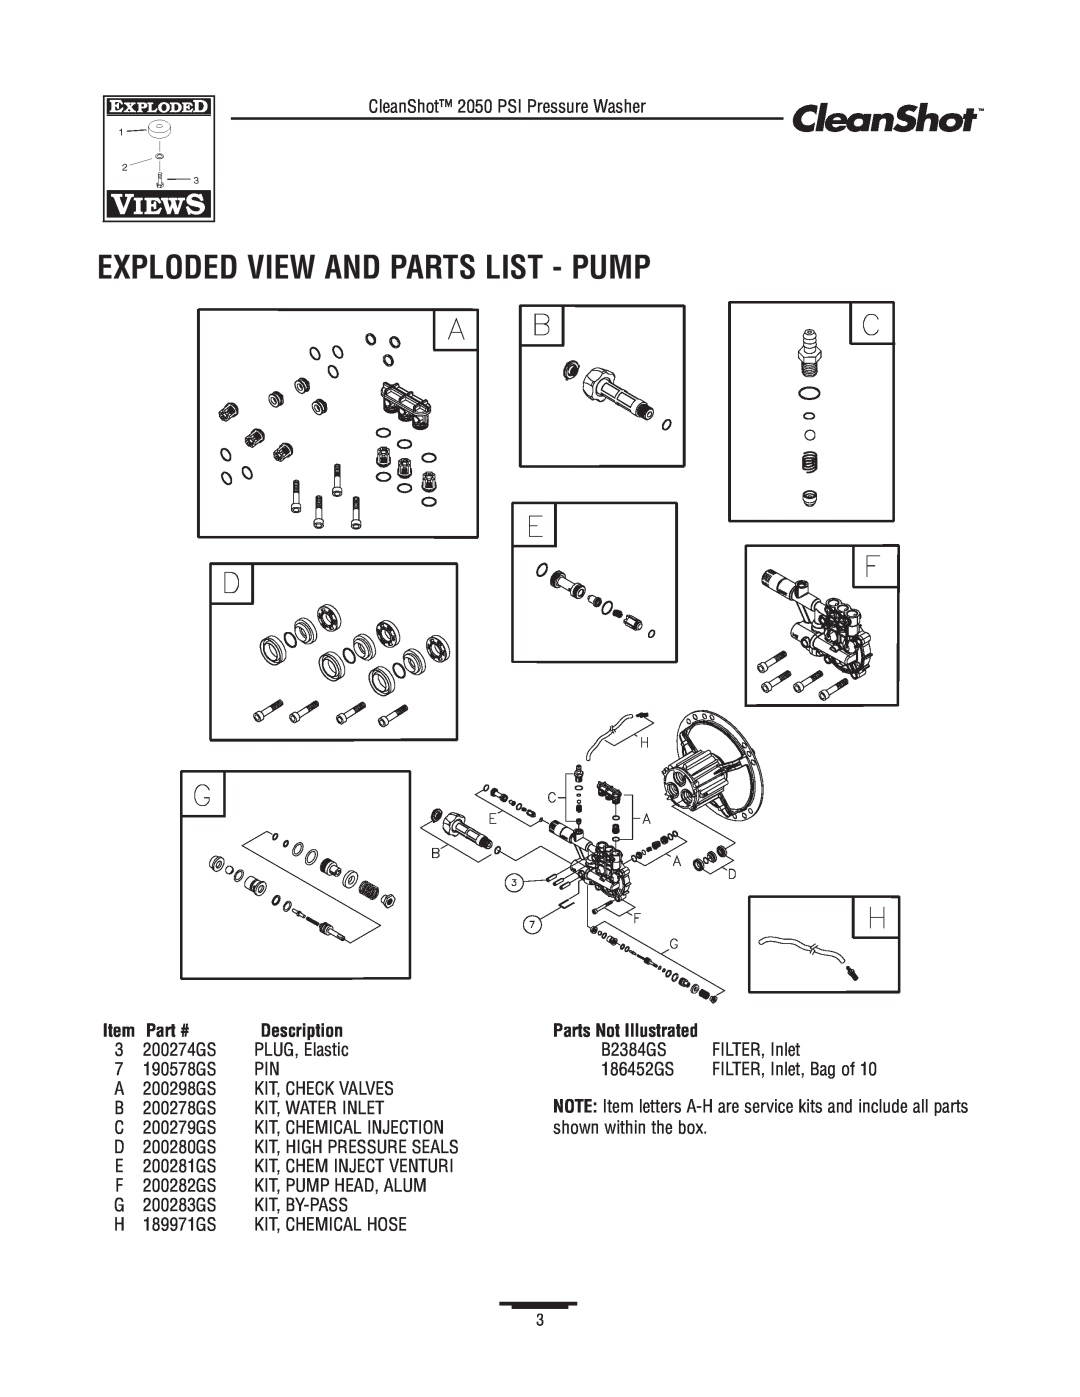 Briggs & Stratton 020206-02 manual Exploded View And Parts List - Pump, Description 